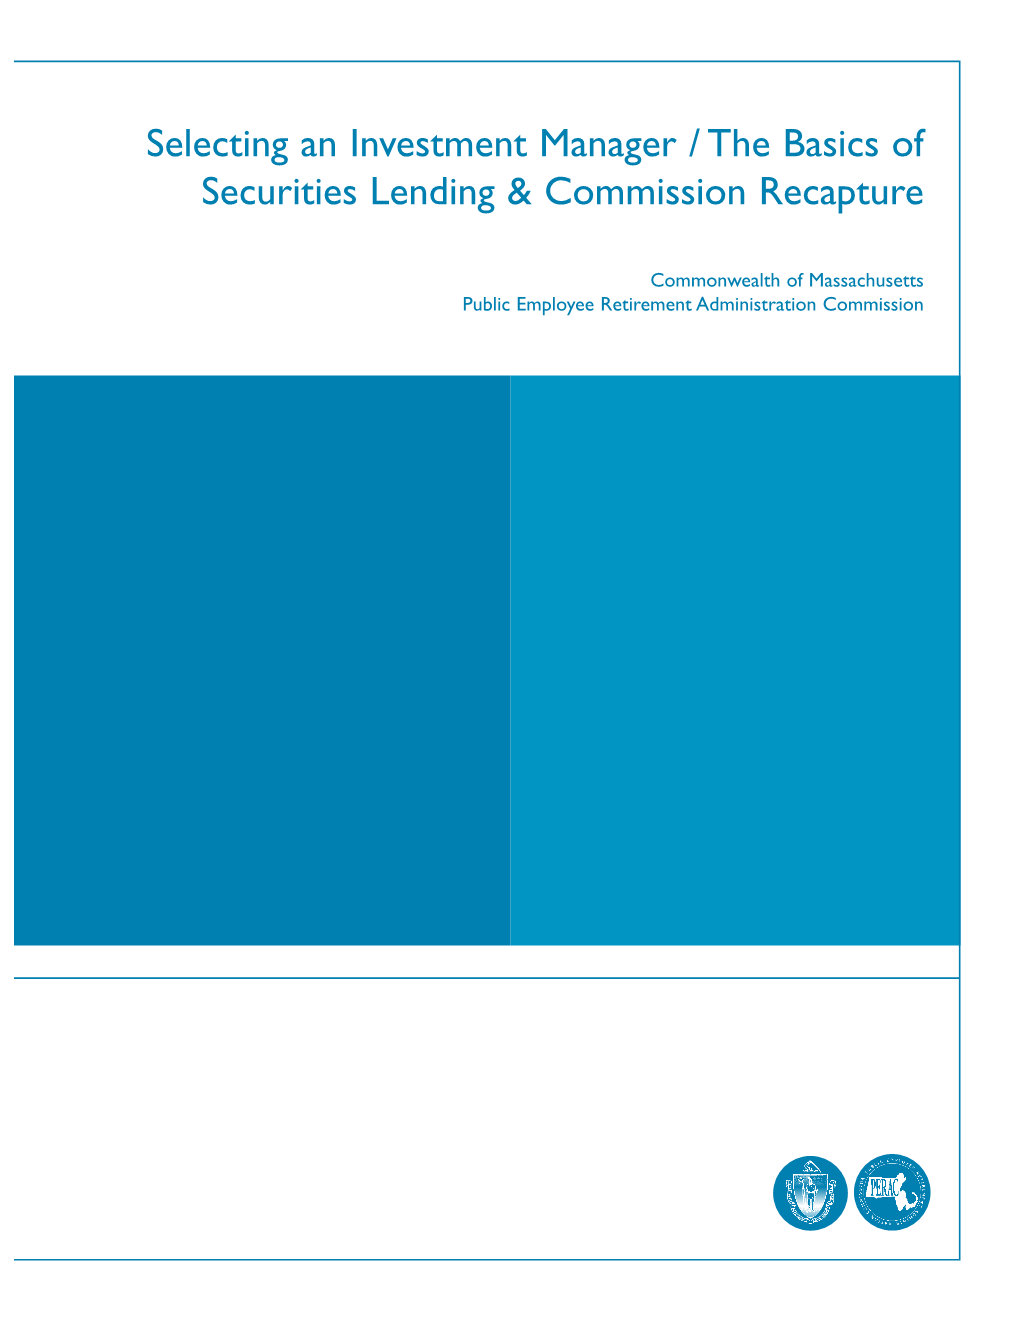 Selecting an Investment Manager/The Basics of Securities Lending